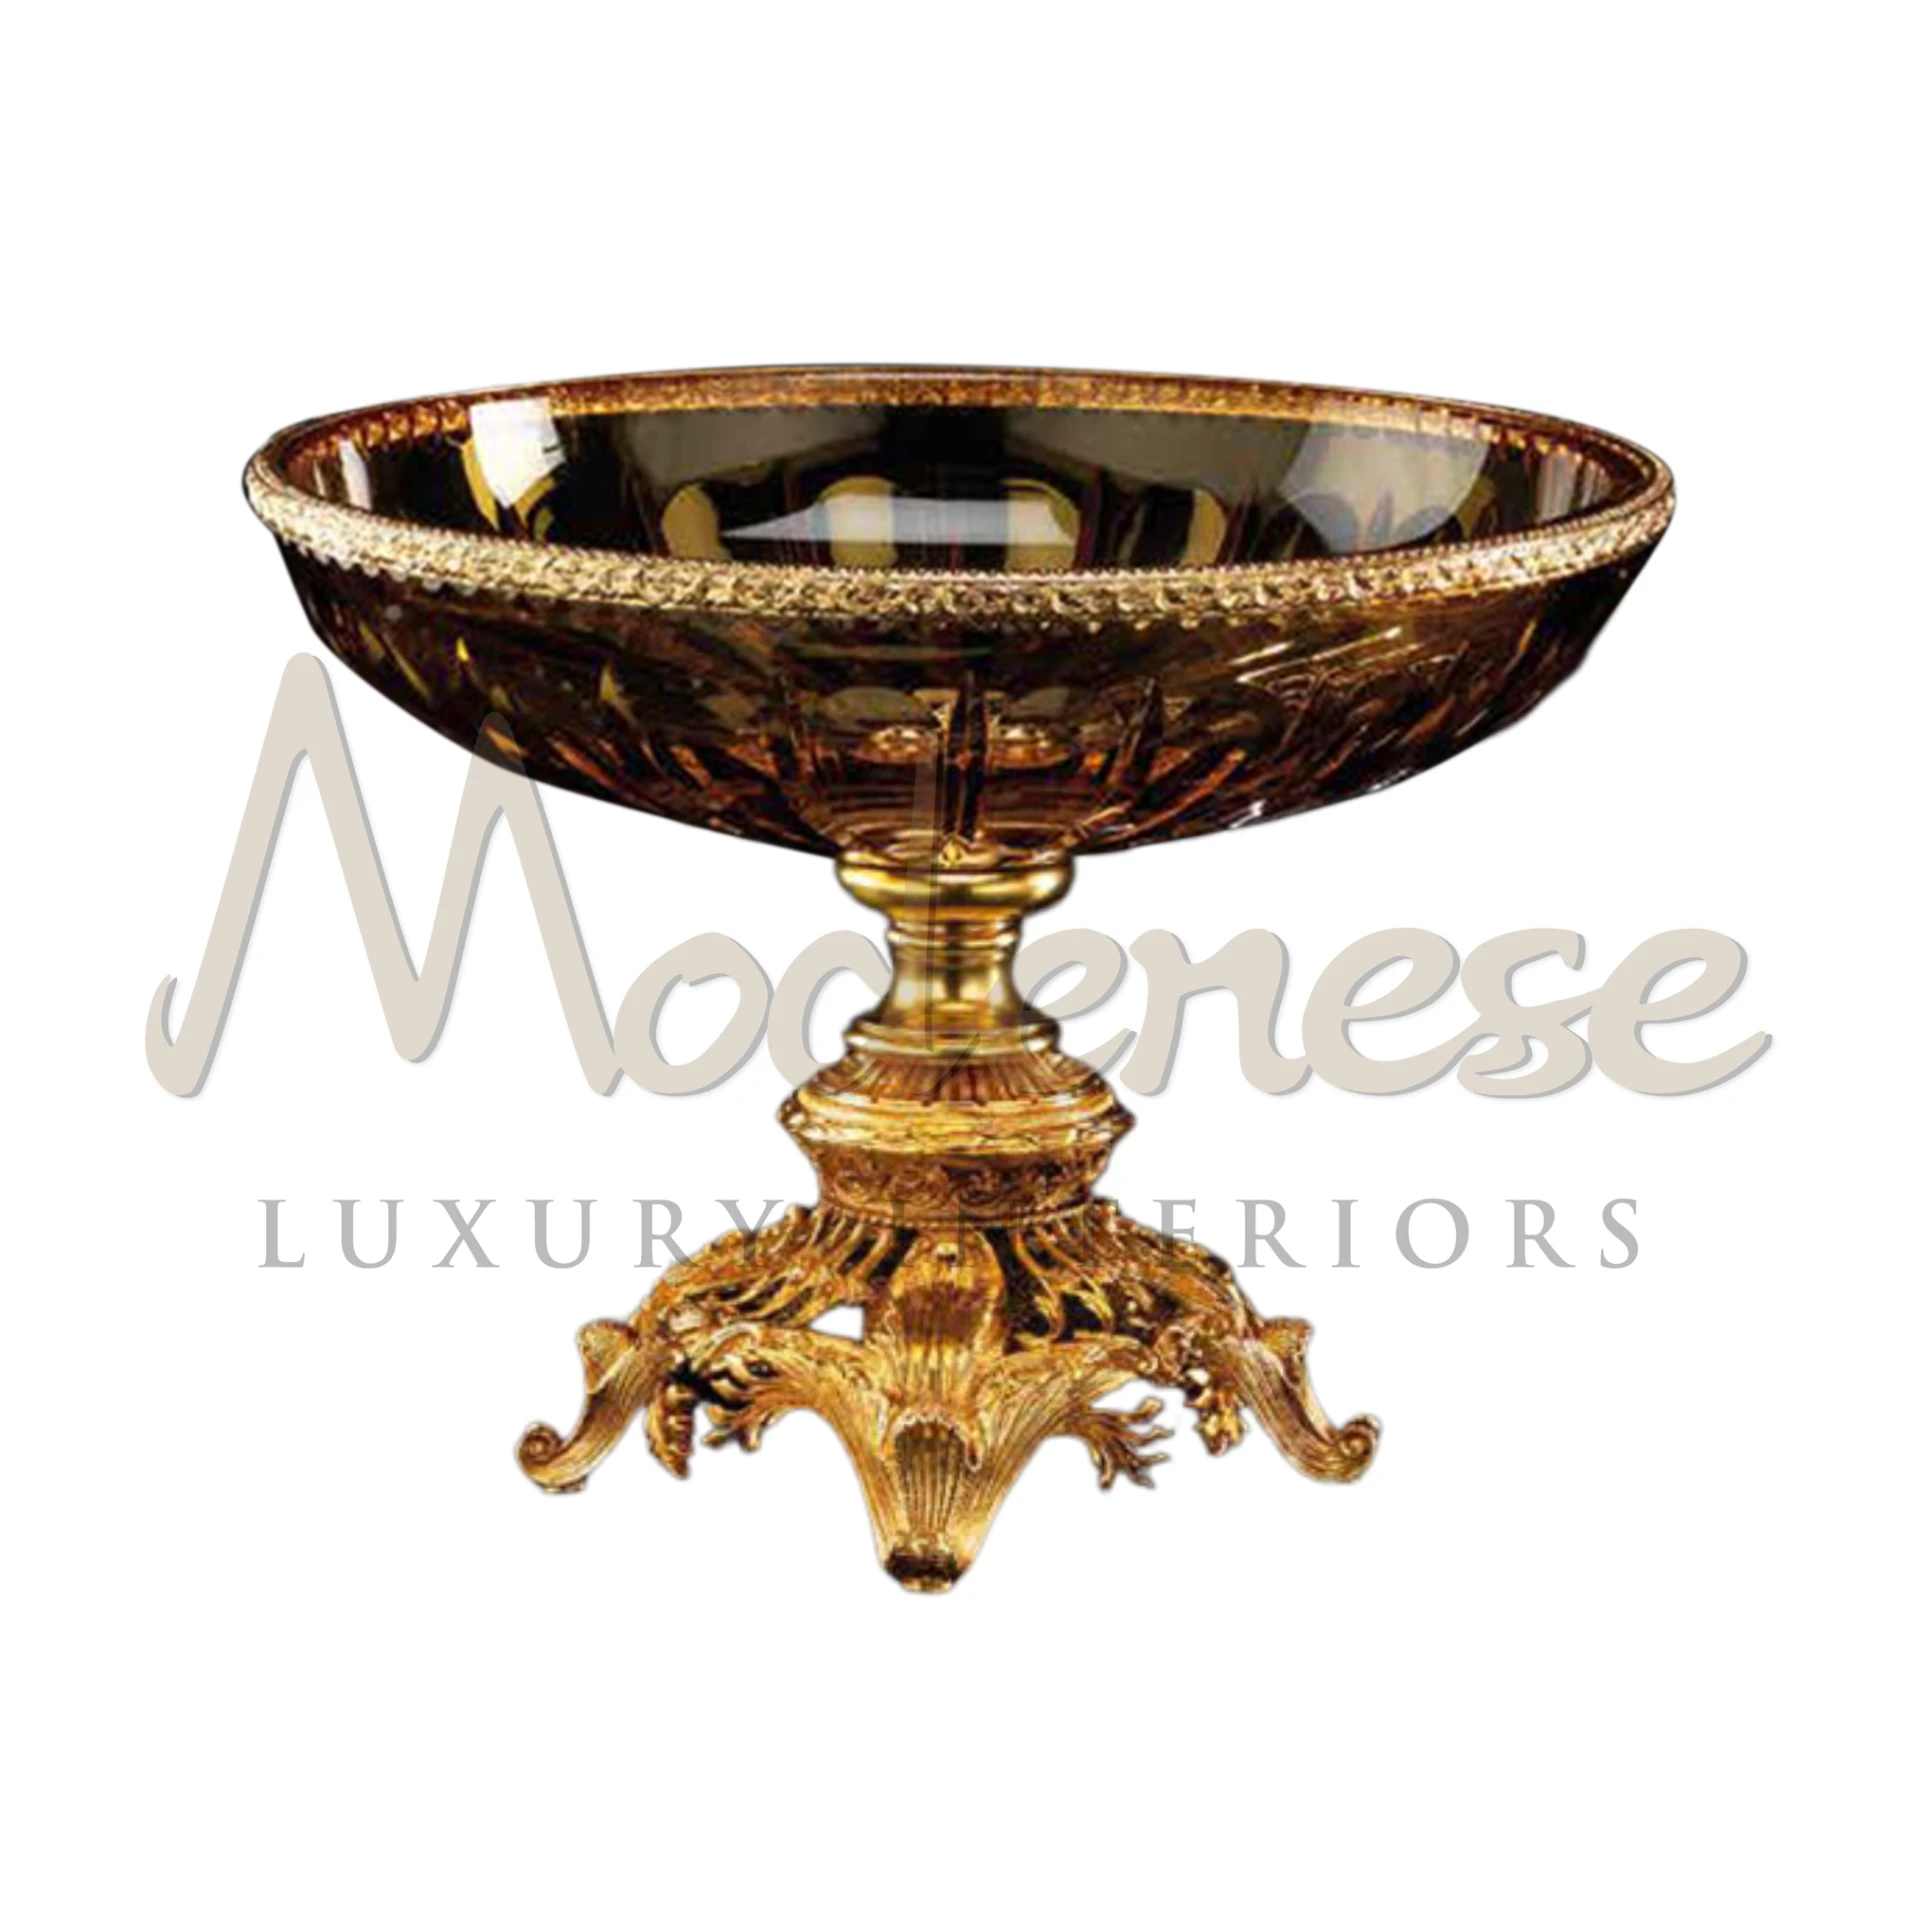 Exquisite vase with shimmering gold leaf base, perfect for luxury interior design, embodies classic and baroque elegance.